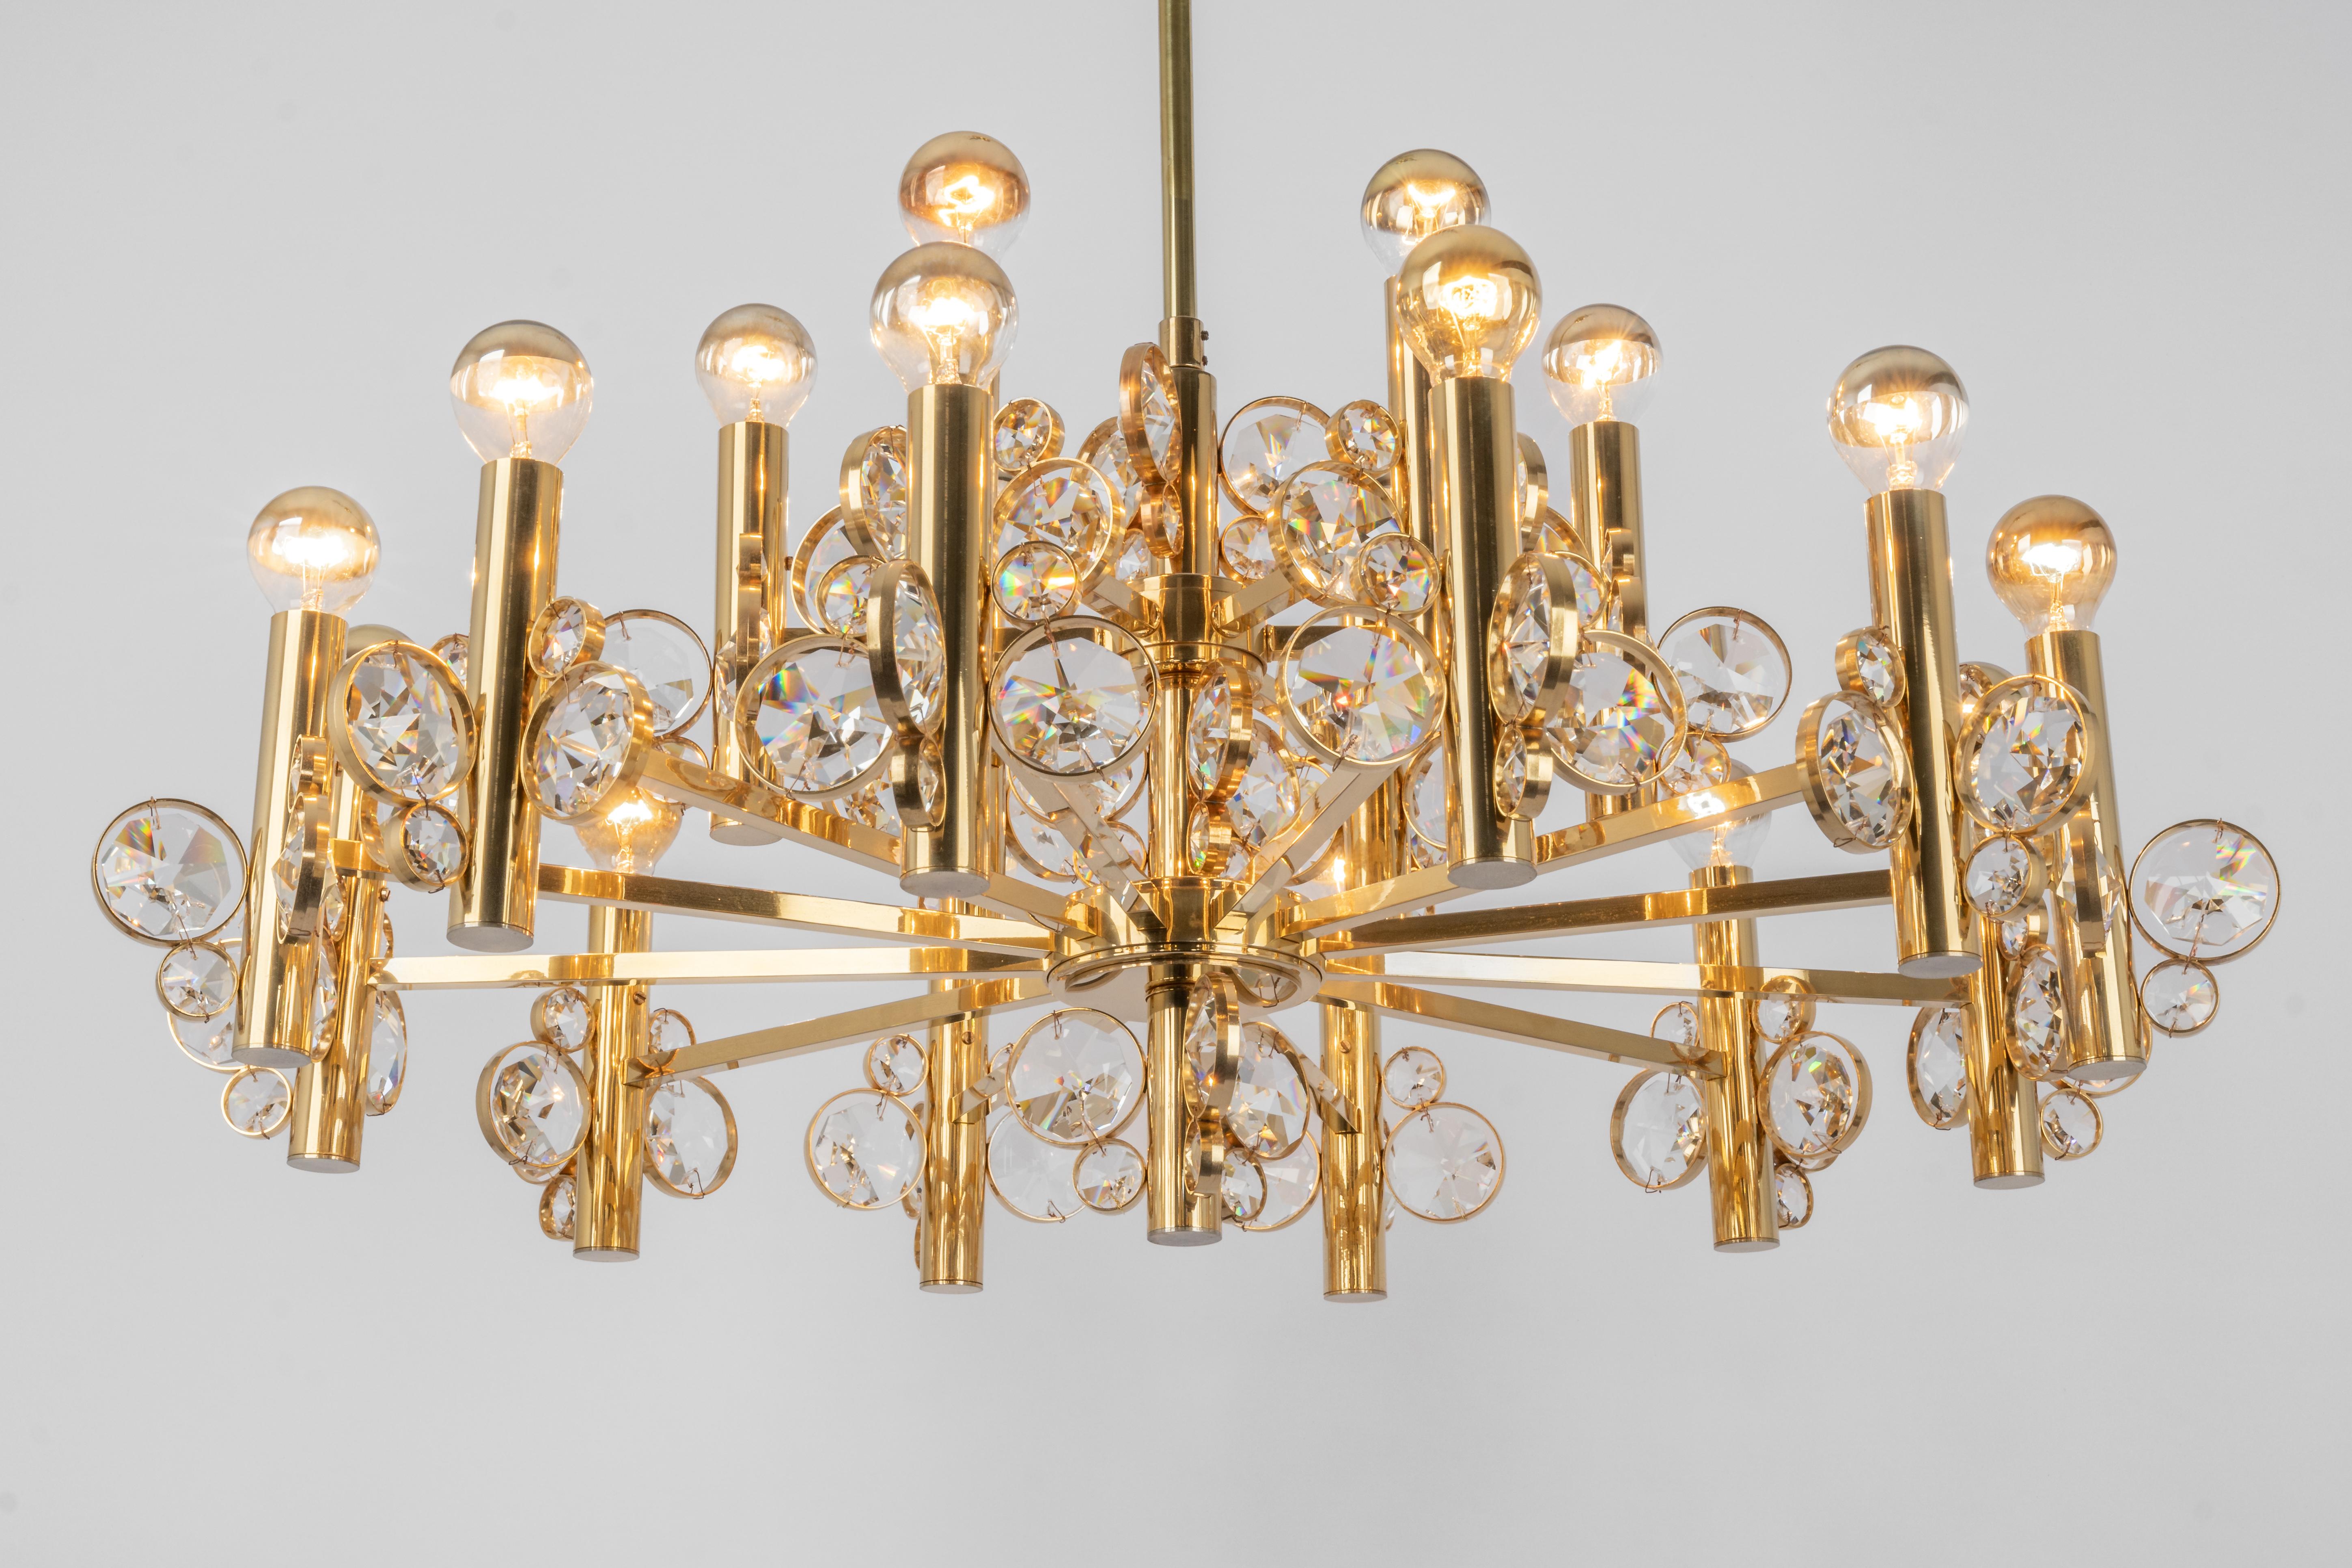 A wonderful and high-quality gilded chandelier by Palwa -Design Sciolari, Germany, 1970s.
It is made of a 24-carat gold-plated brass frame decorated with individual 